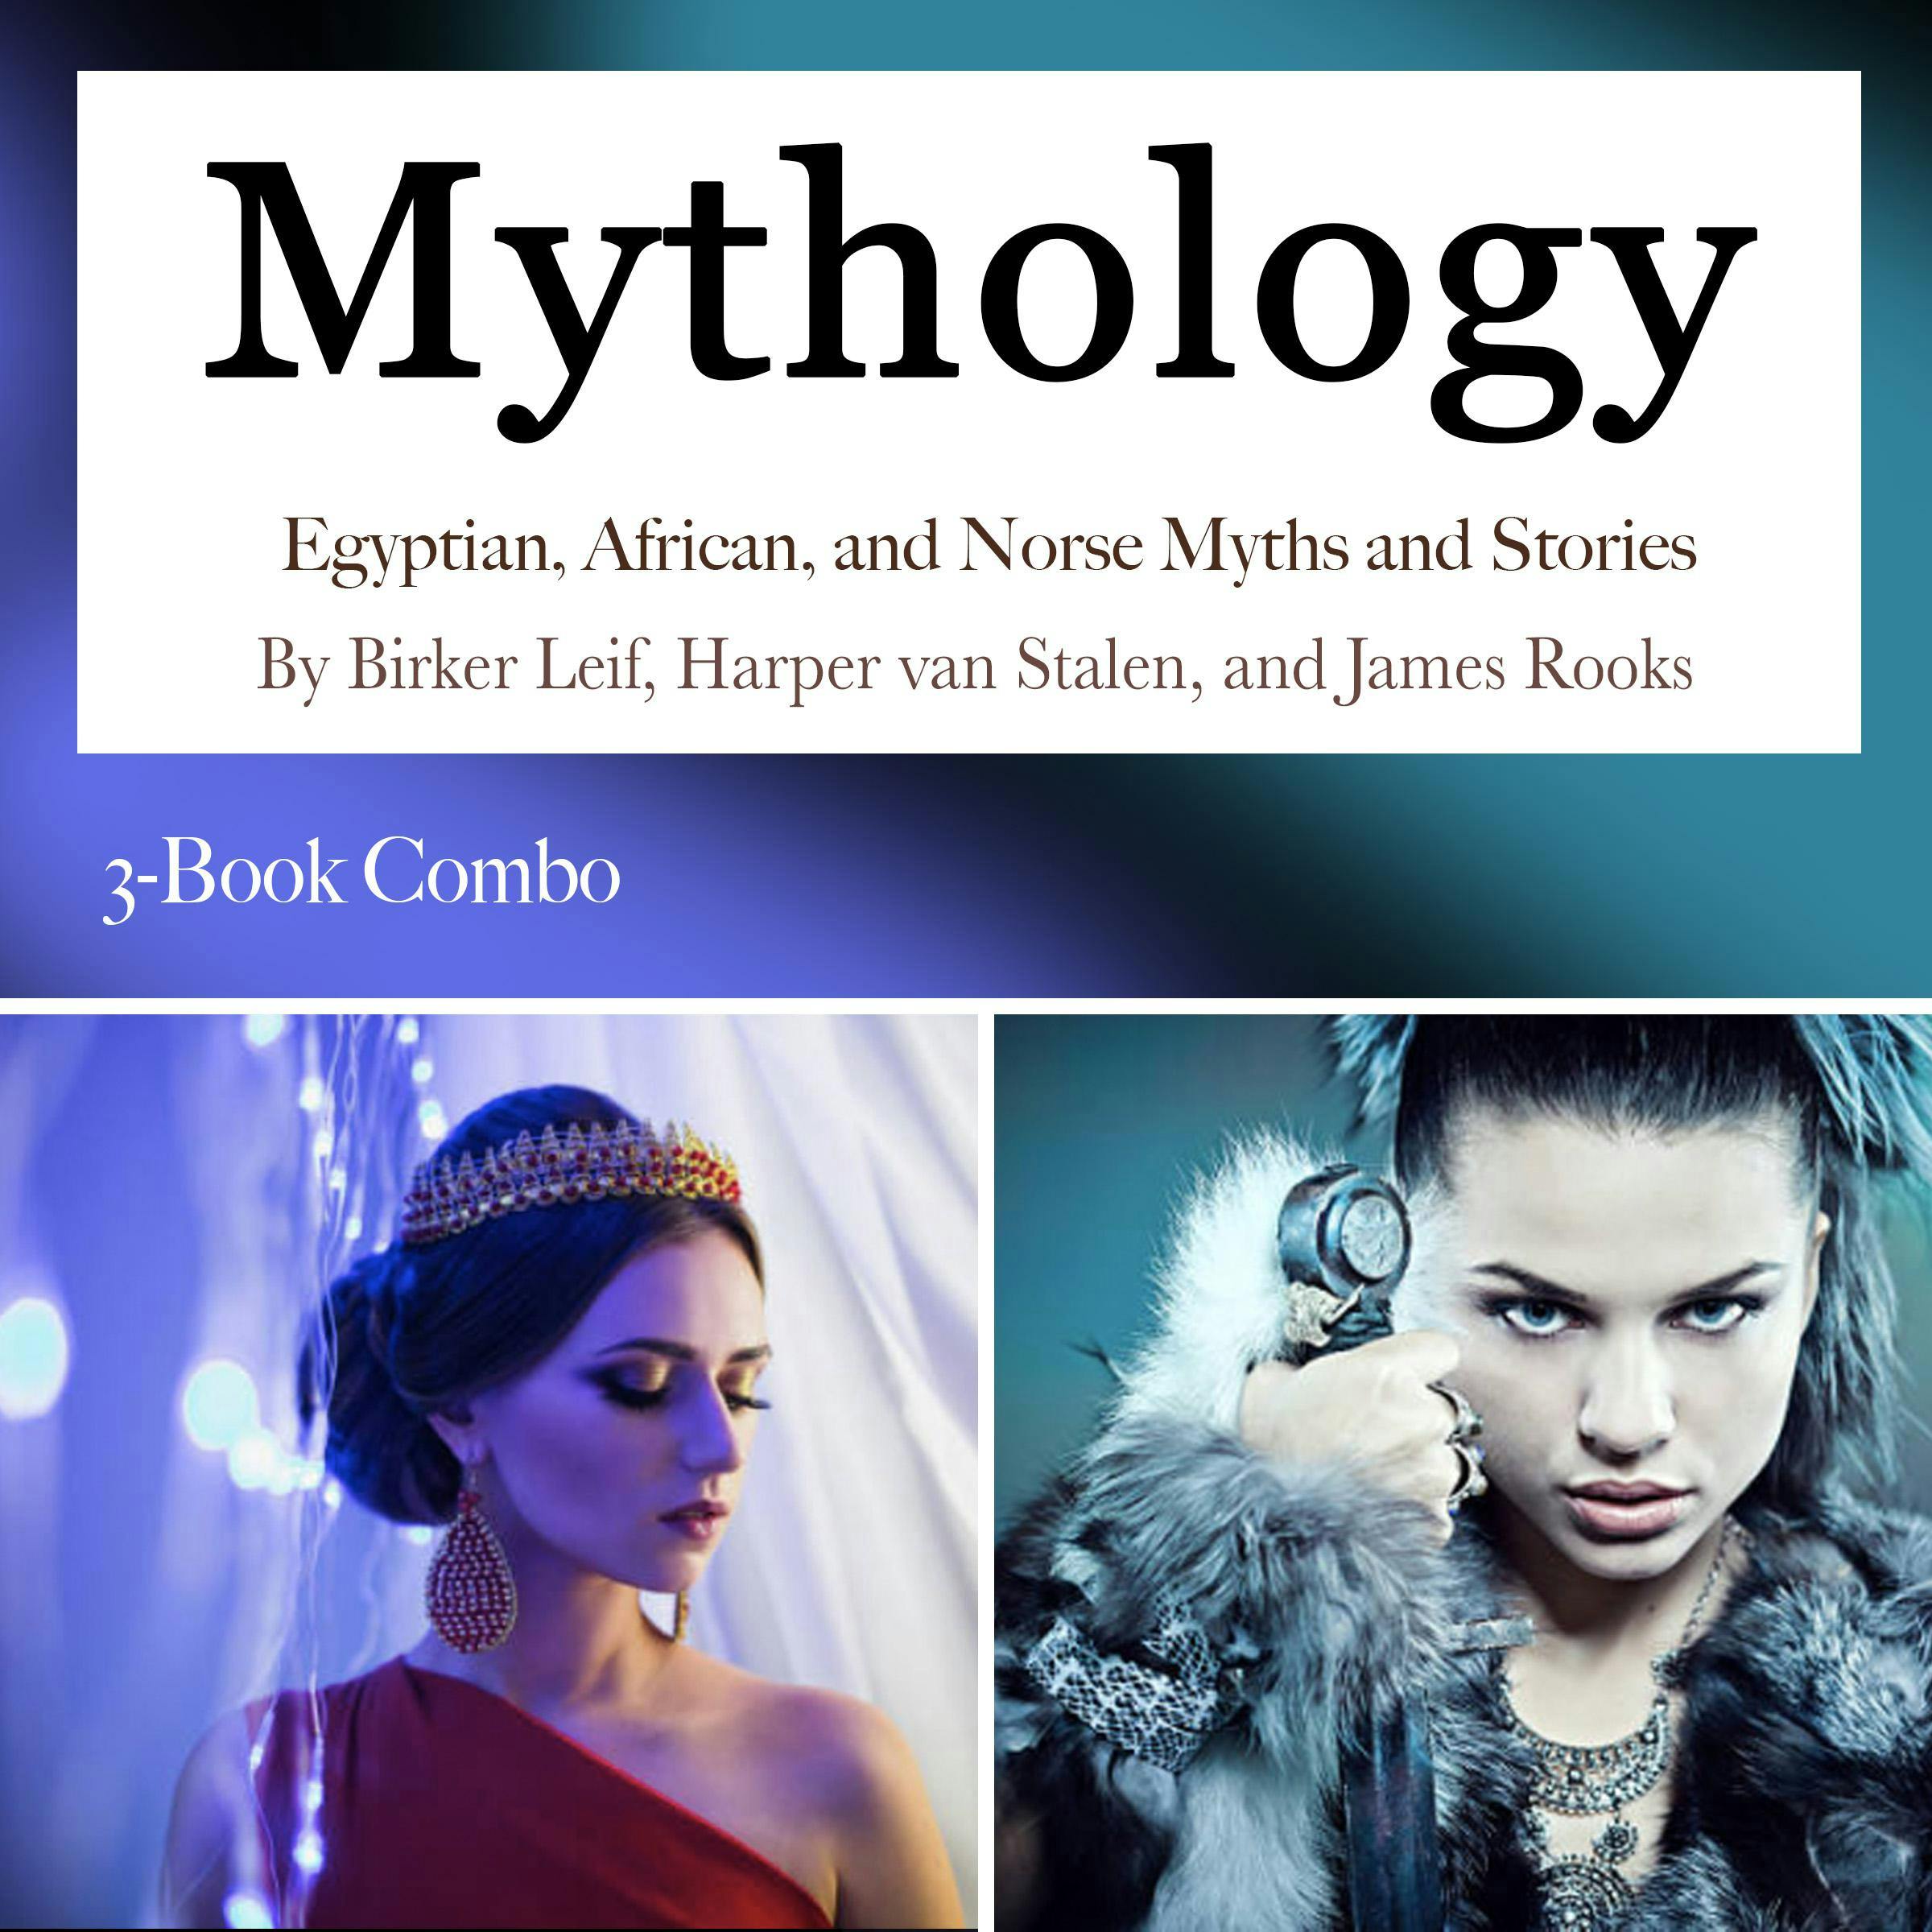 Mythology: Egyptian, African, and Norse Myths and Stories - undefined